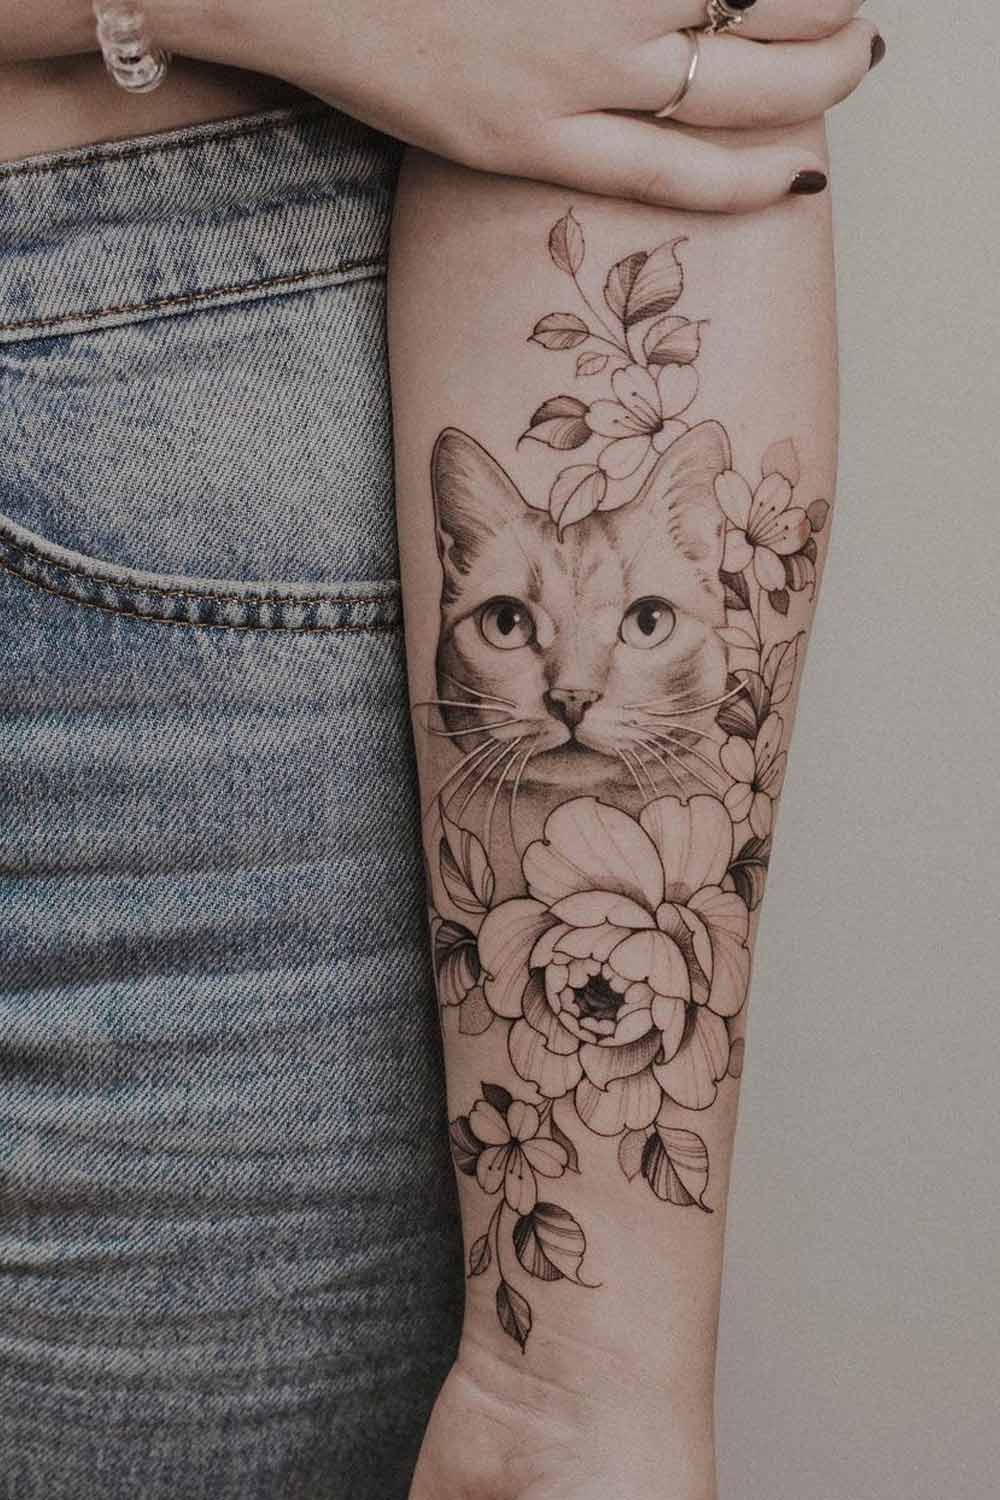 Realistic Cat Tattoo with Flowers